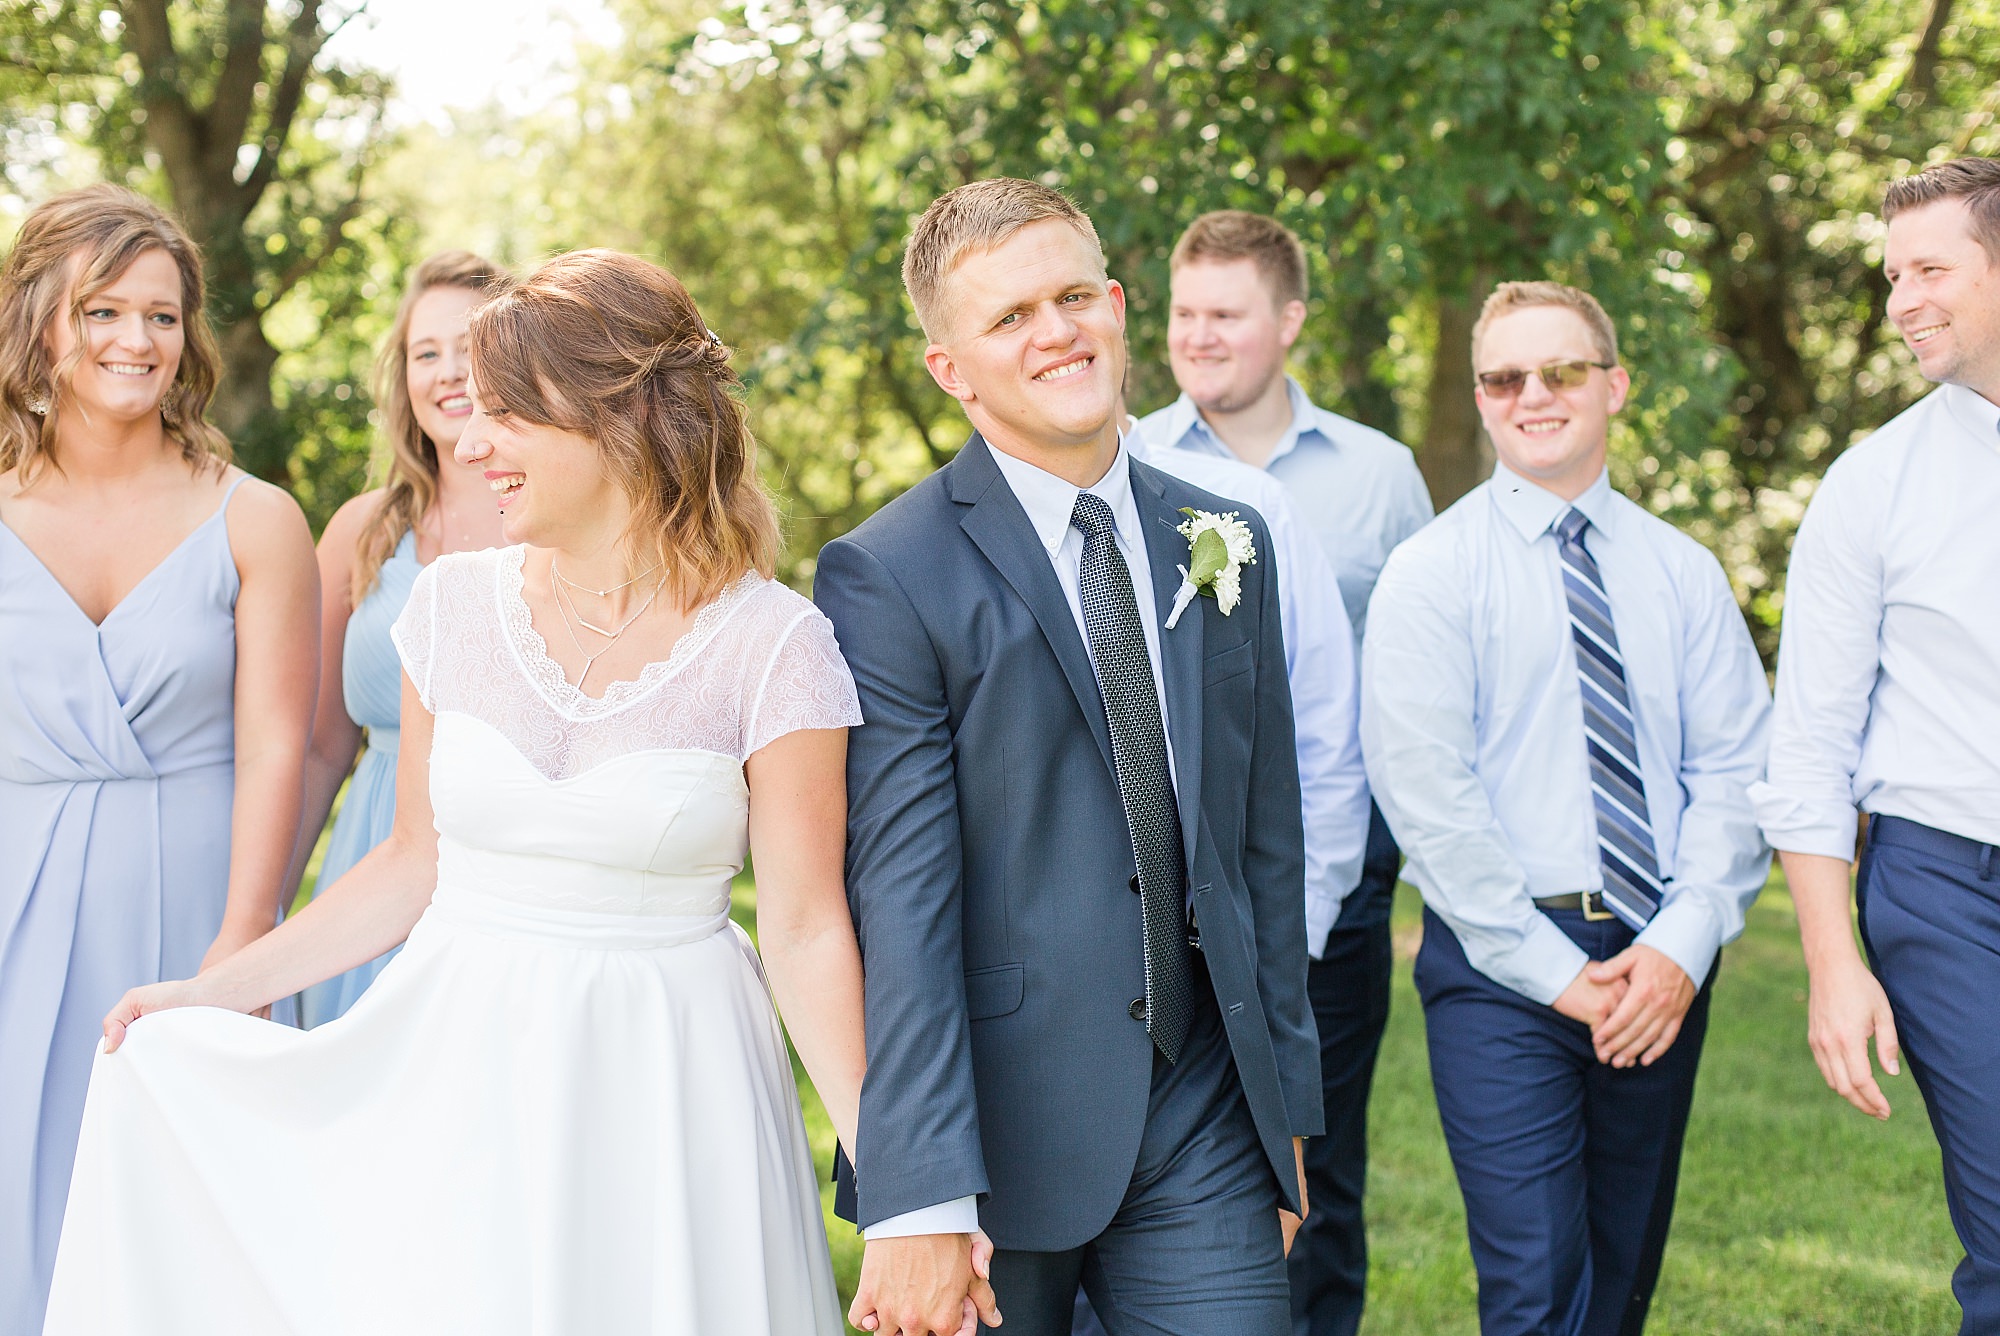 How to create a wedding day timeline for plenty of fun bridal party photos